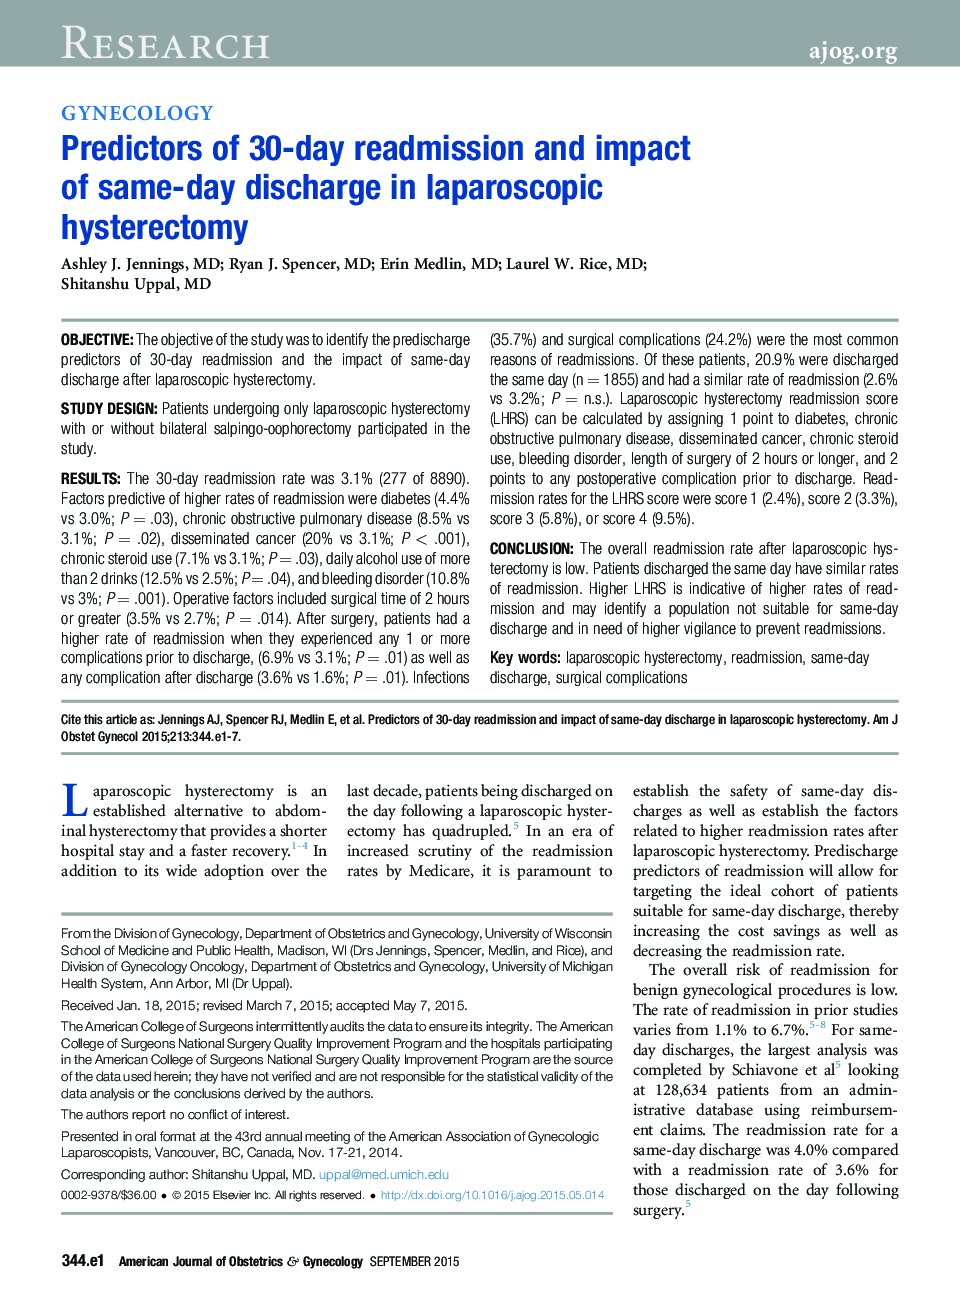 Predictors of 30-day readmission and impact of same-day discharge in laparoscopic hysterectomy